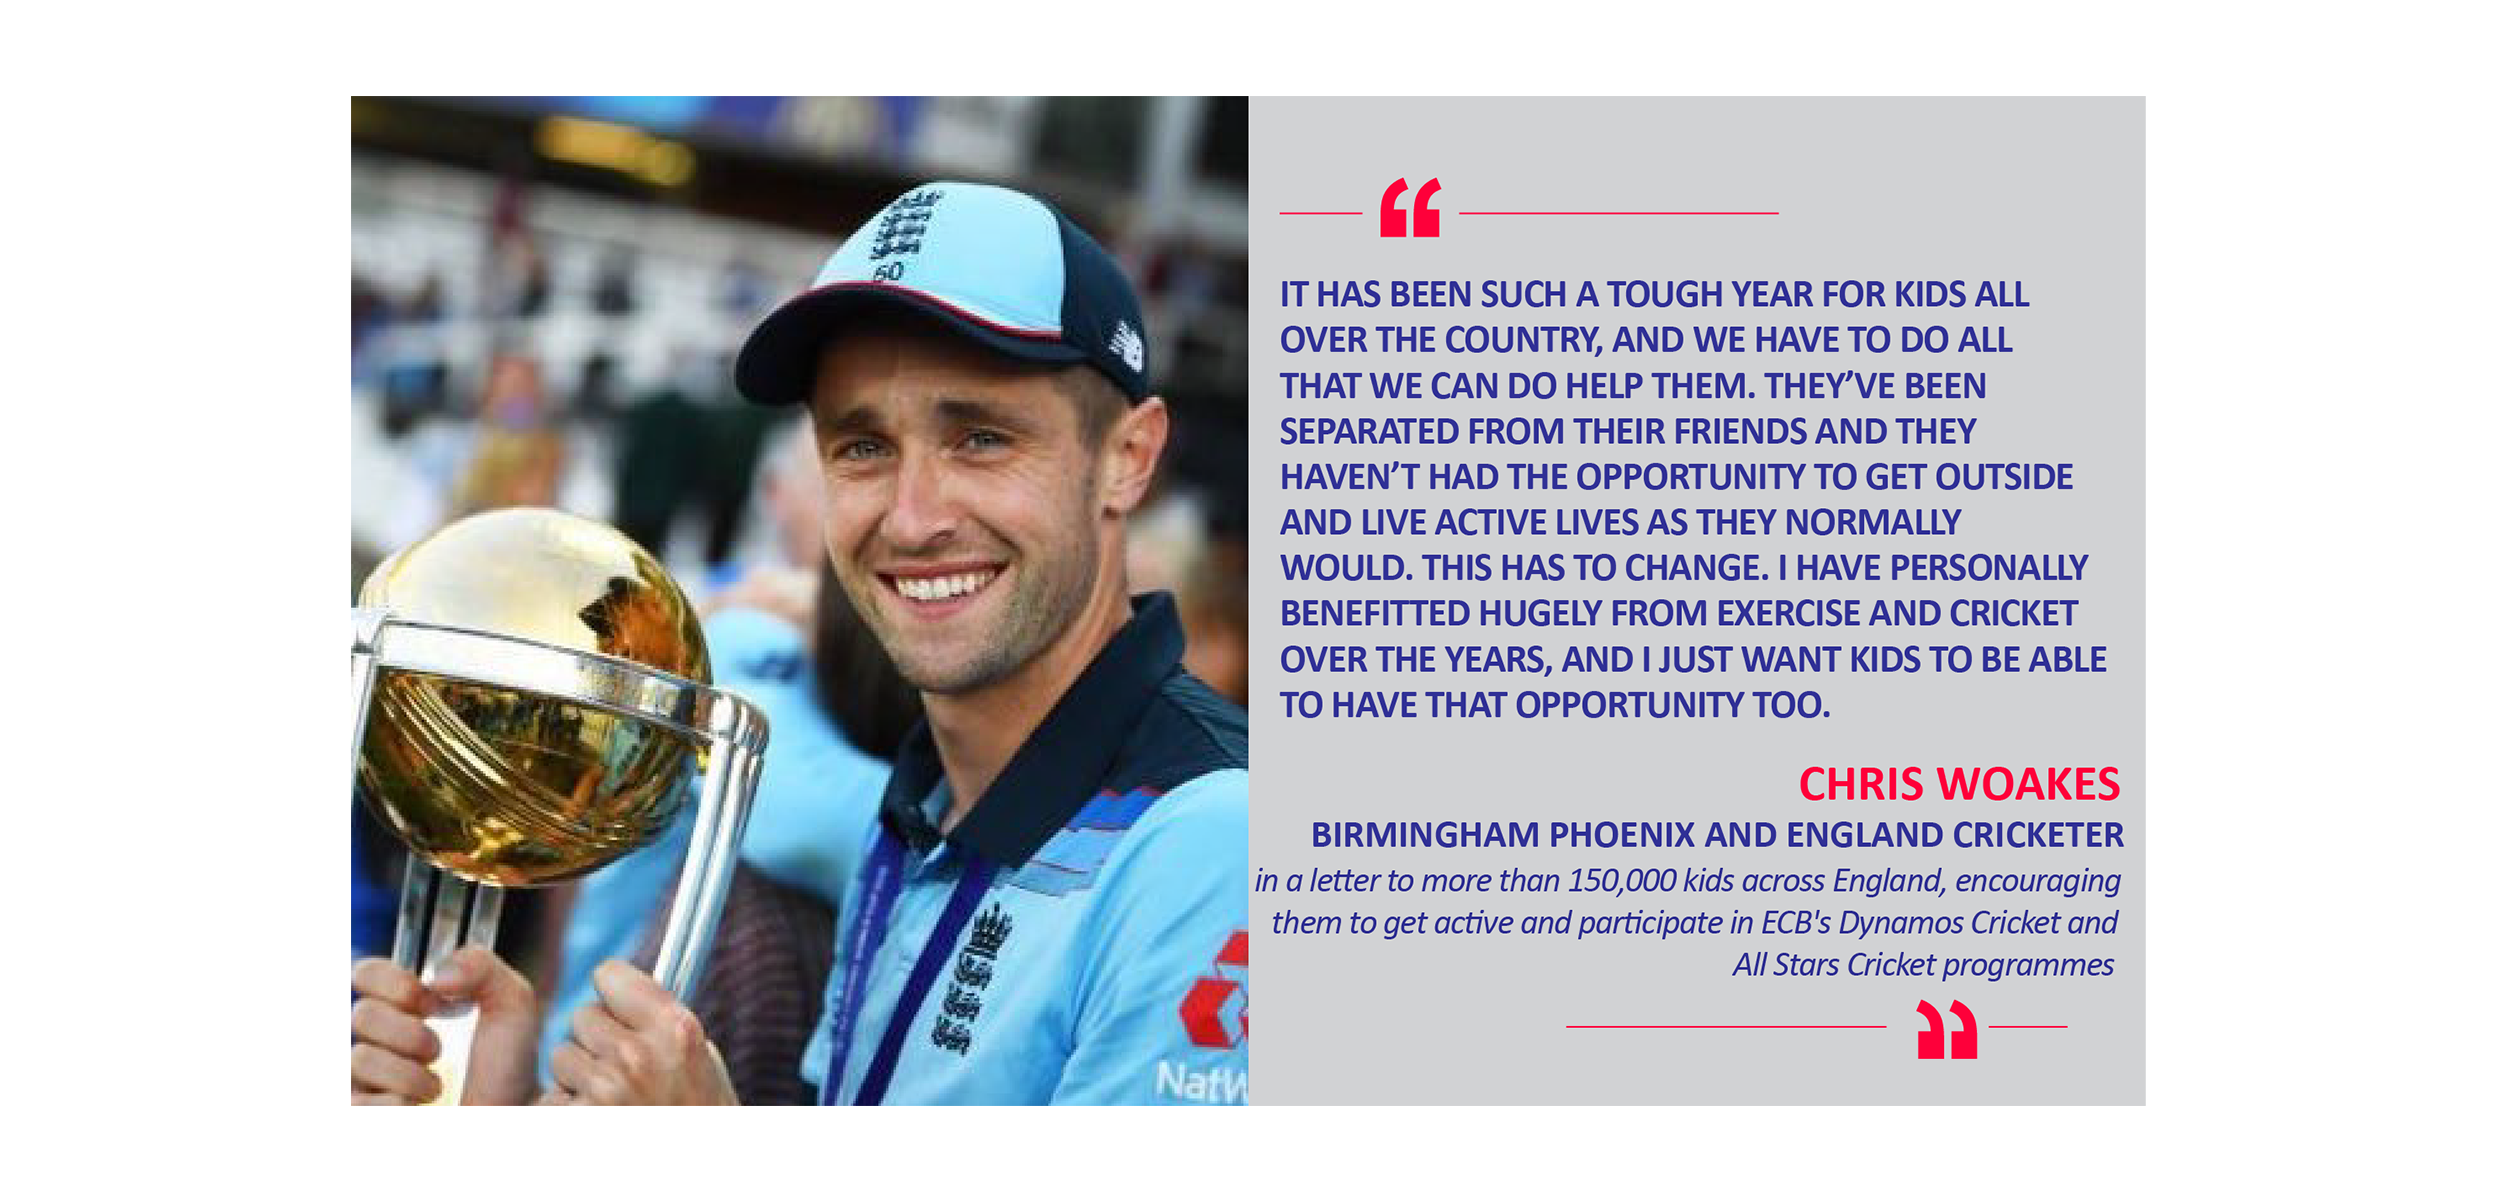 Chris Woakes, Birmingham Phoenix and England Cricketer in a letter to more than 150,000 kids across England, encouraging them to get active and participate in ECB's Dynamos Cricket and All Stars Cricket programmes